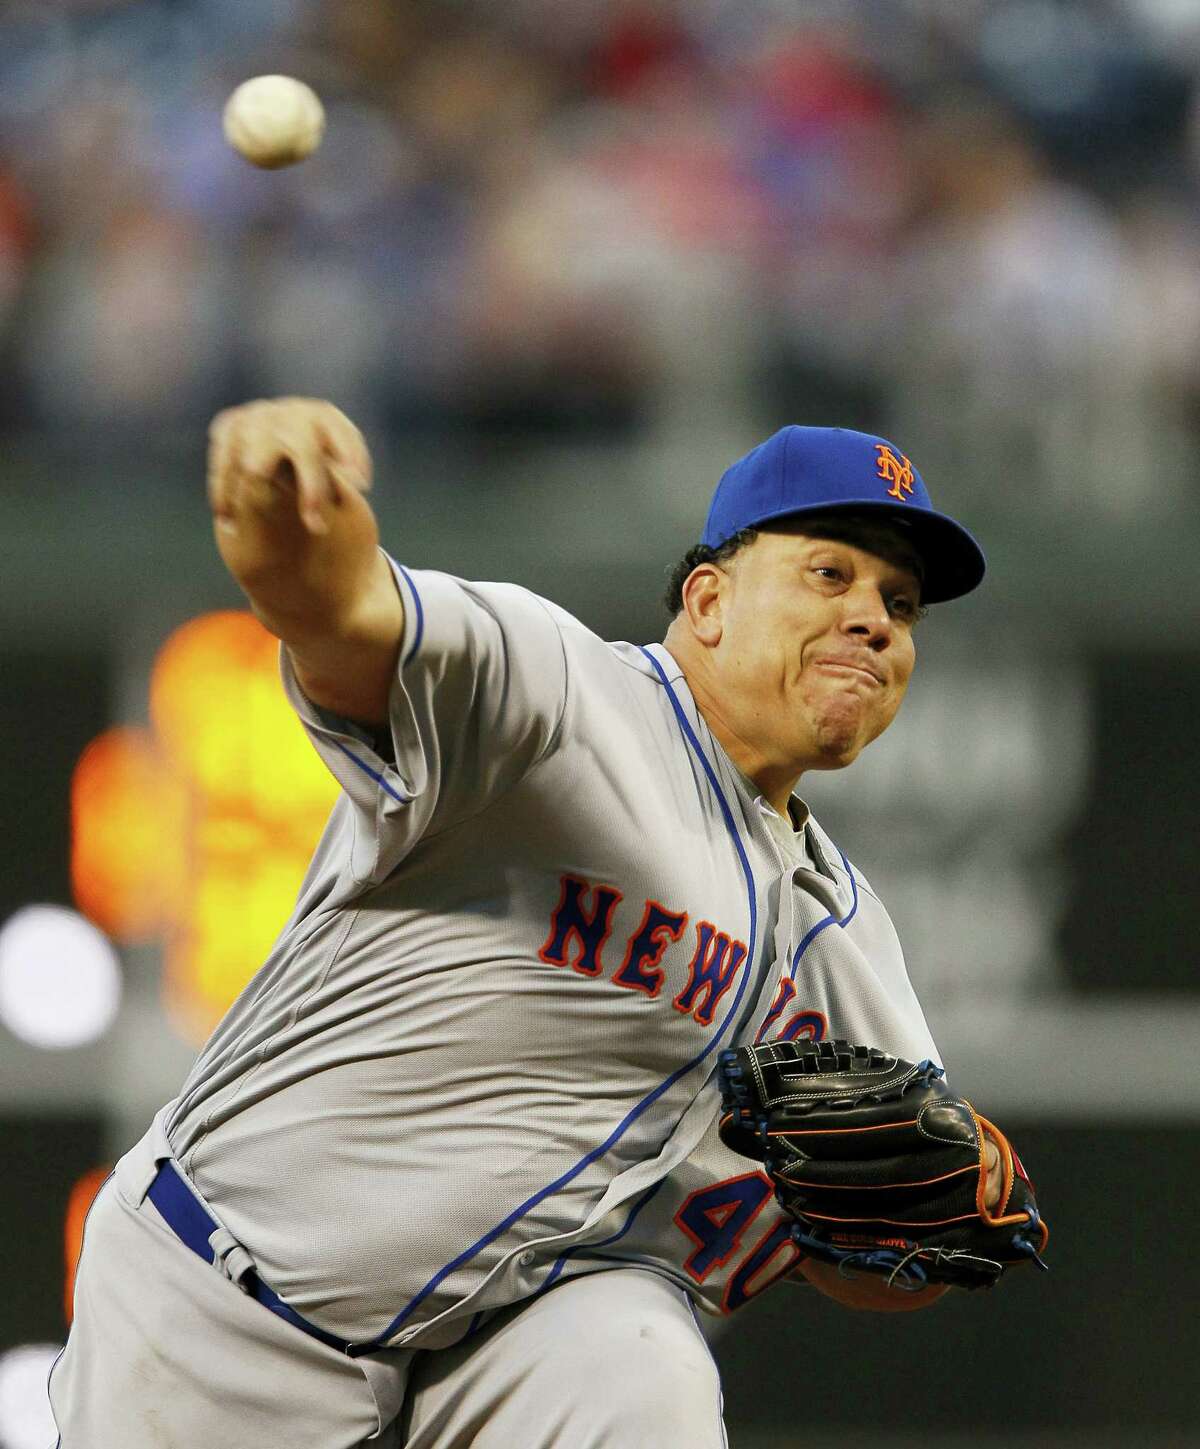 Bartolo Colon throws during the first inning on Wednesday.